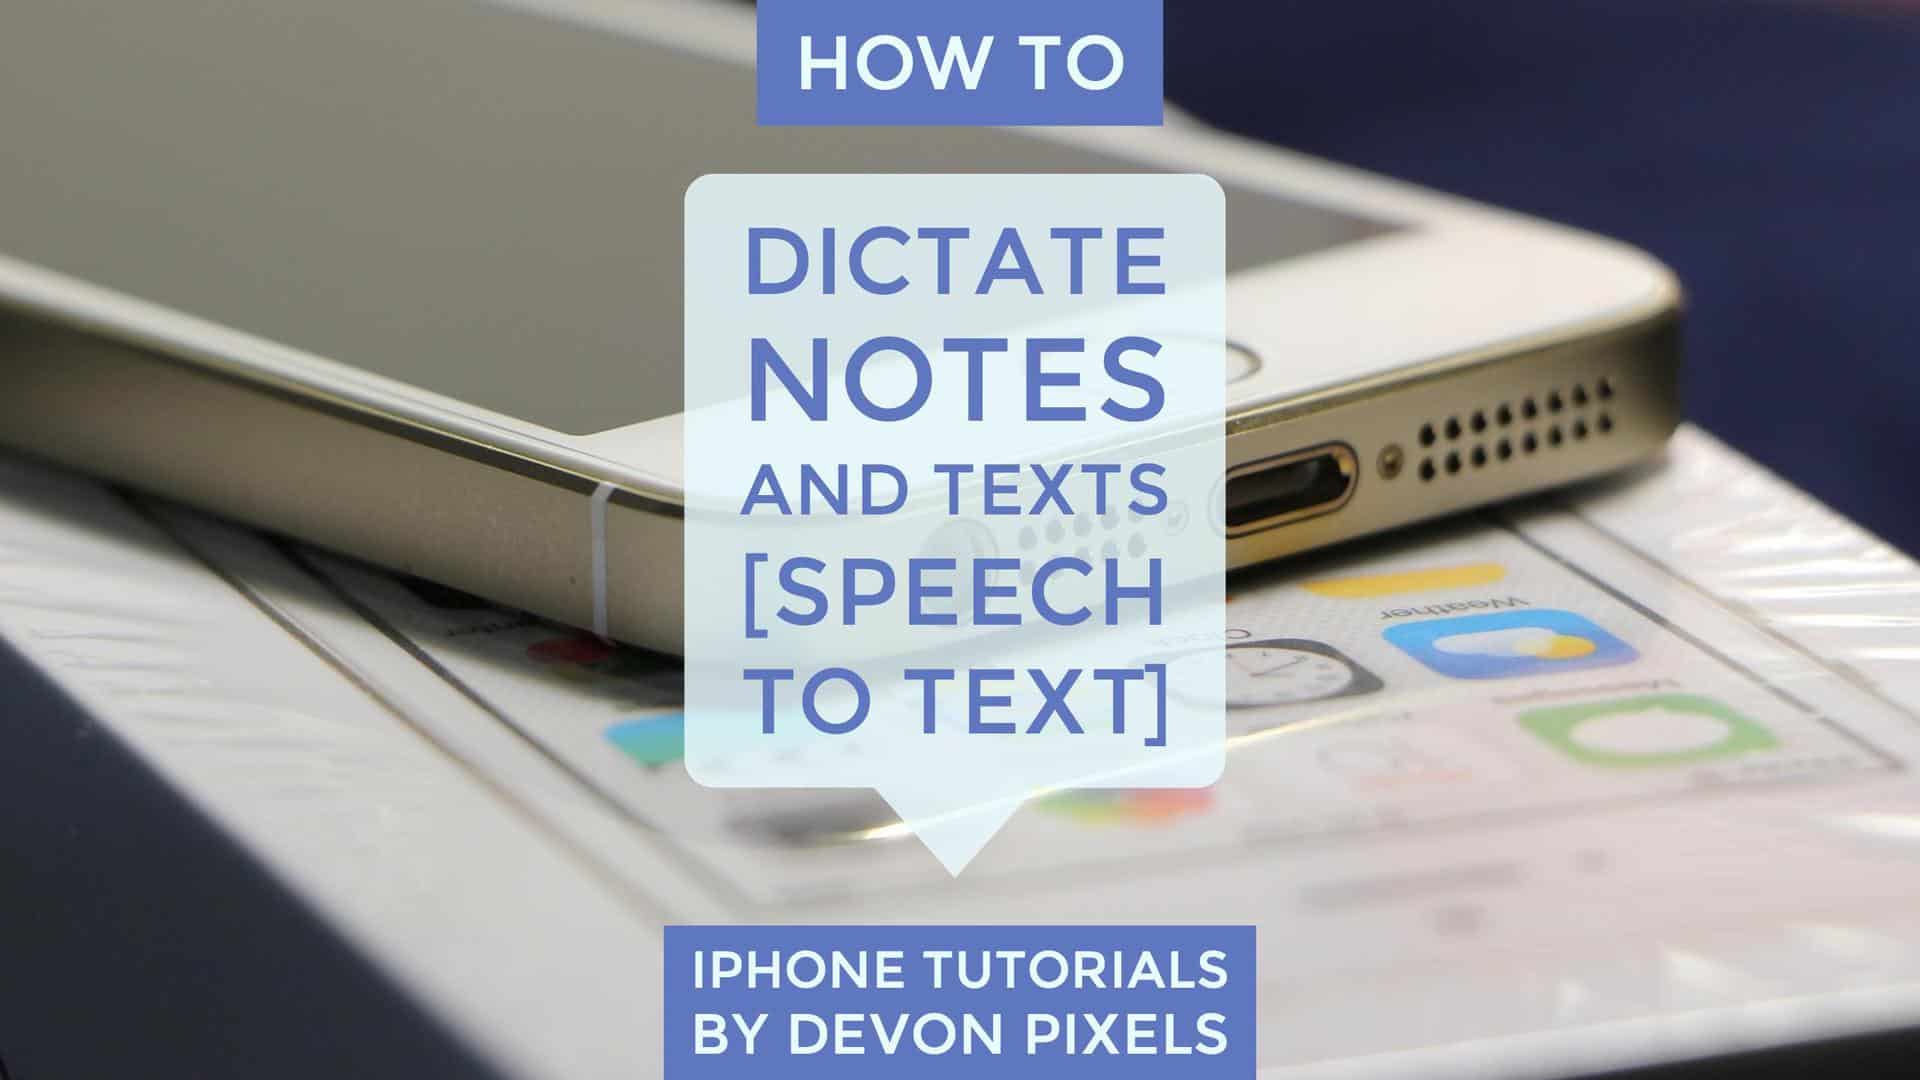 How to dictate notes and texts on iPhone